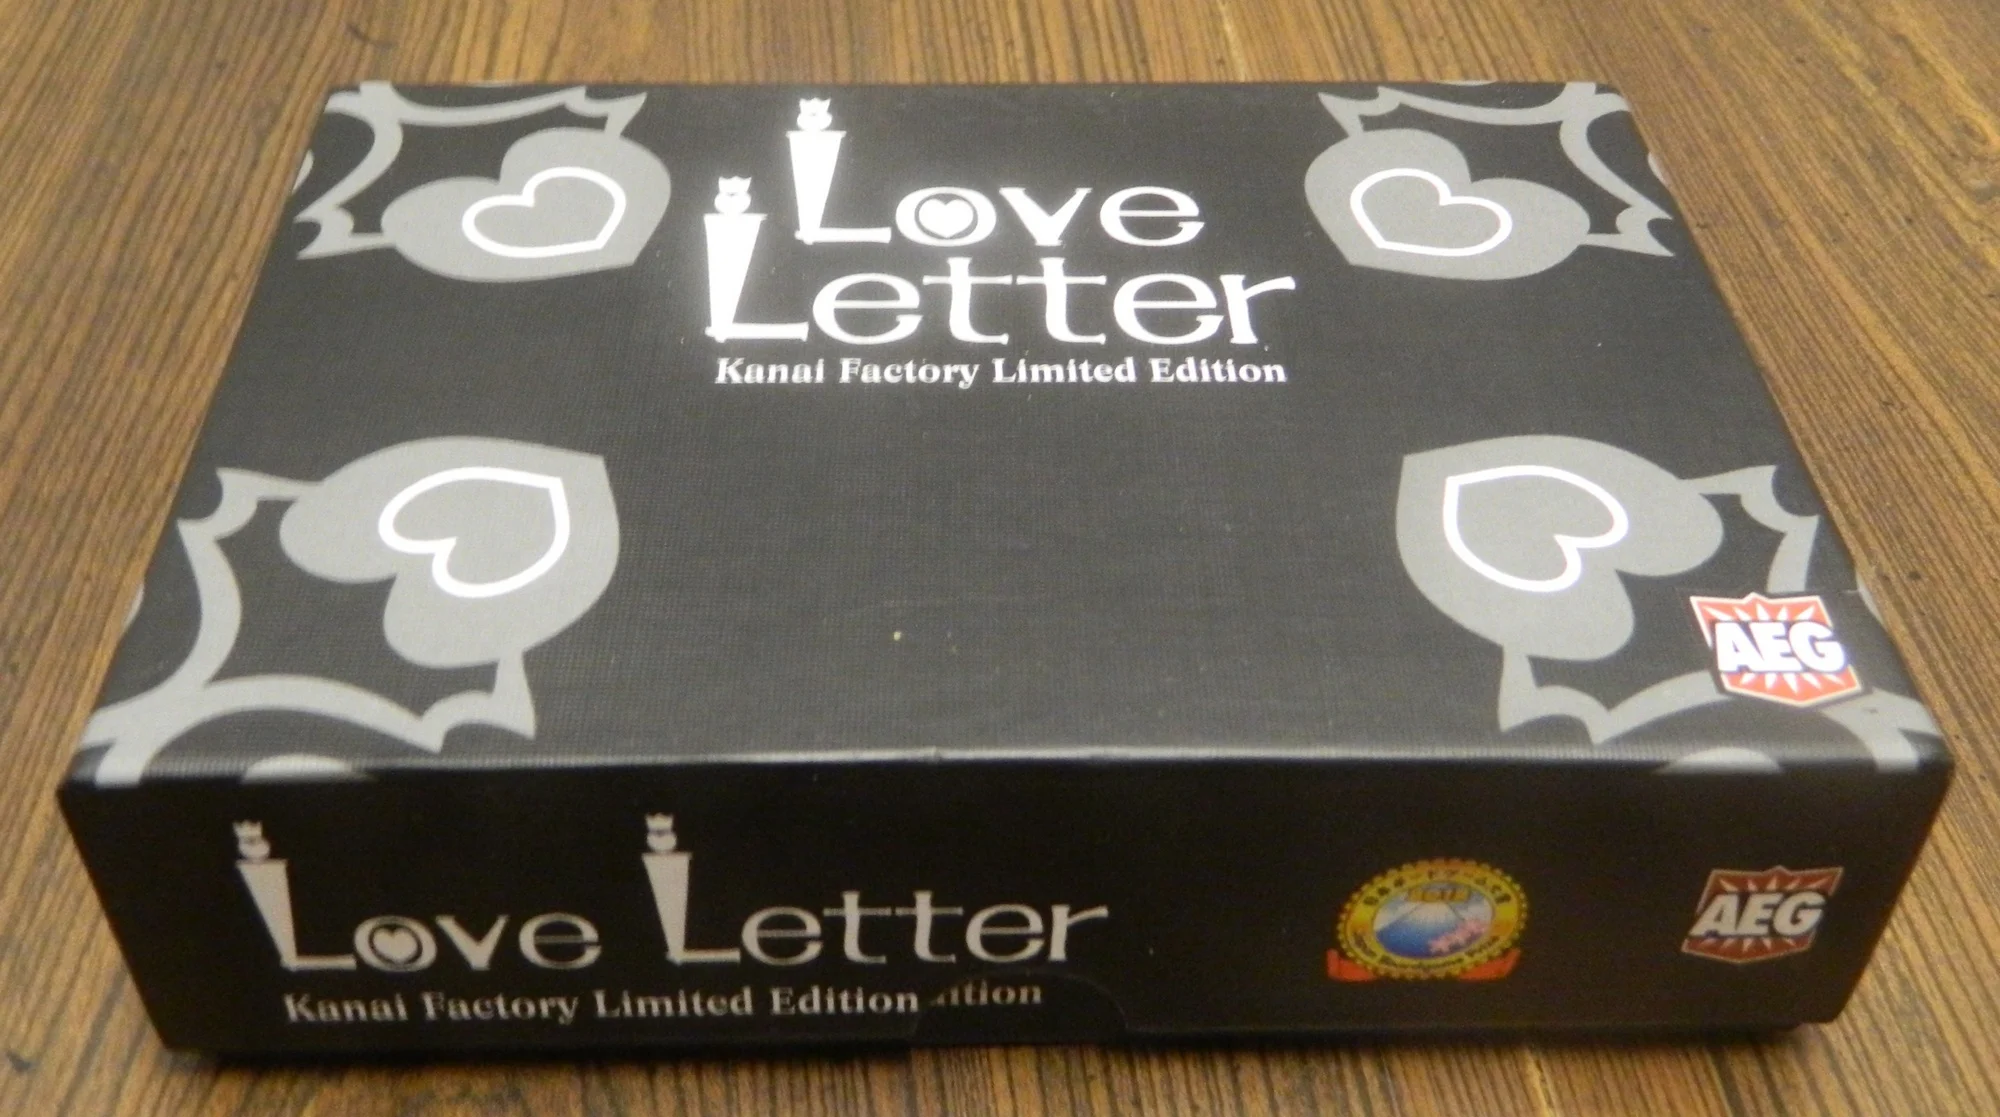 Lover Letter Kanai Factory Limited Edition Box